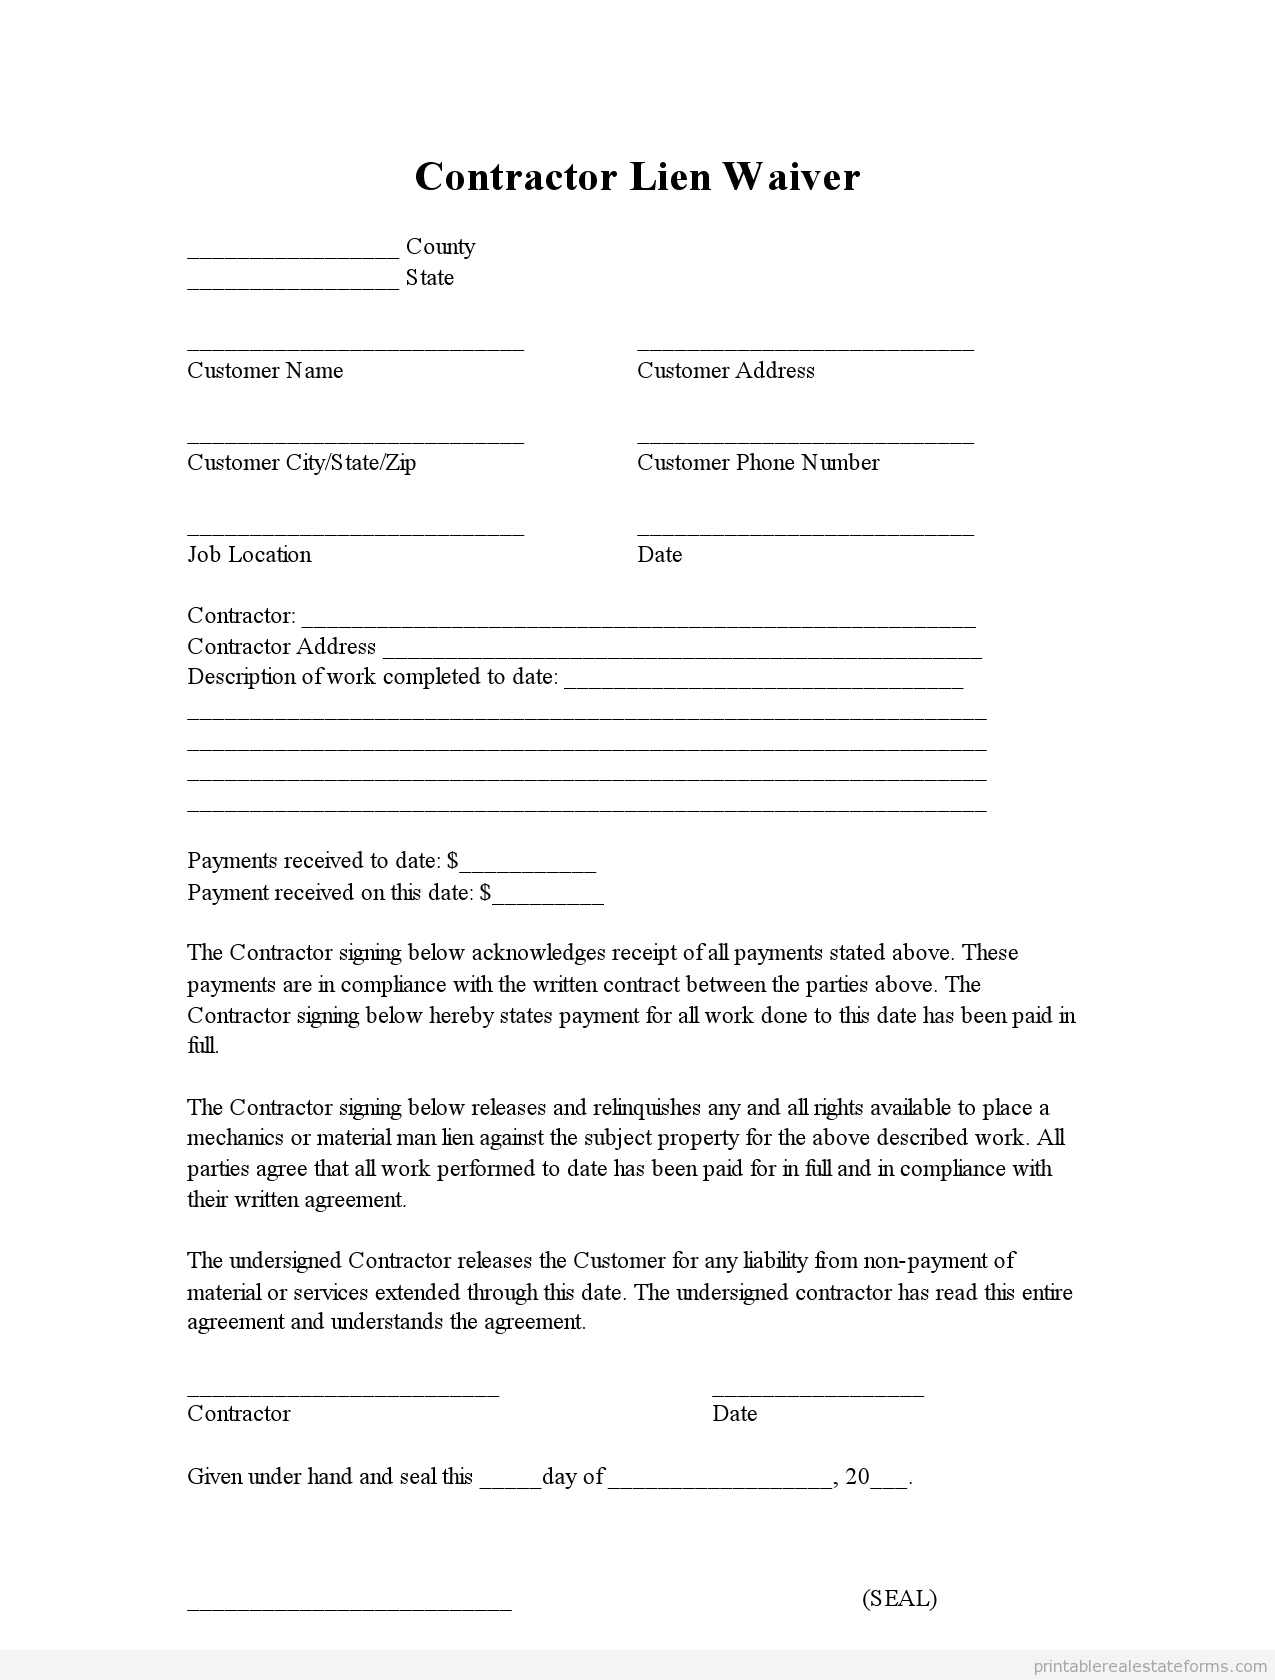 Waiver Letter Template - Sample Printable Contractor Lien Waiver form